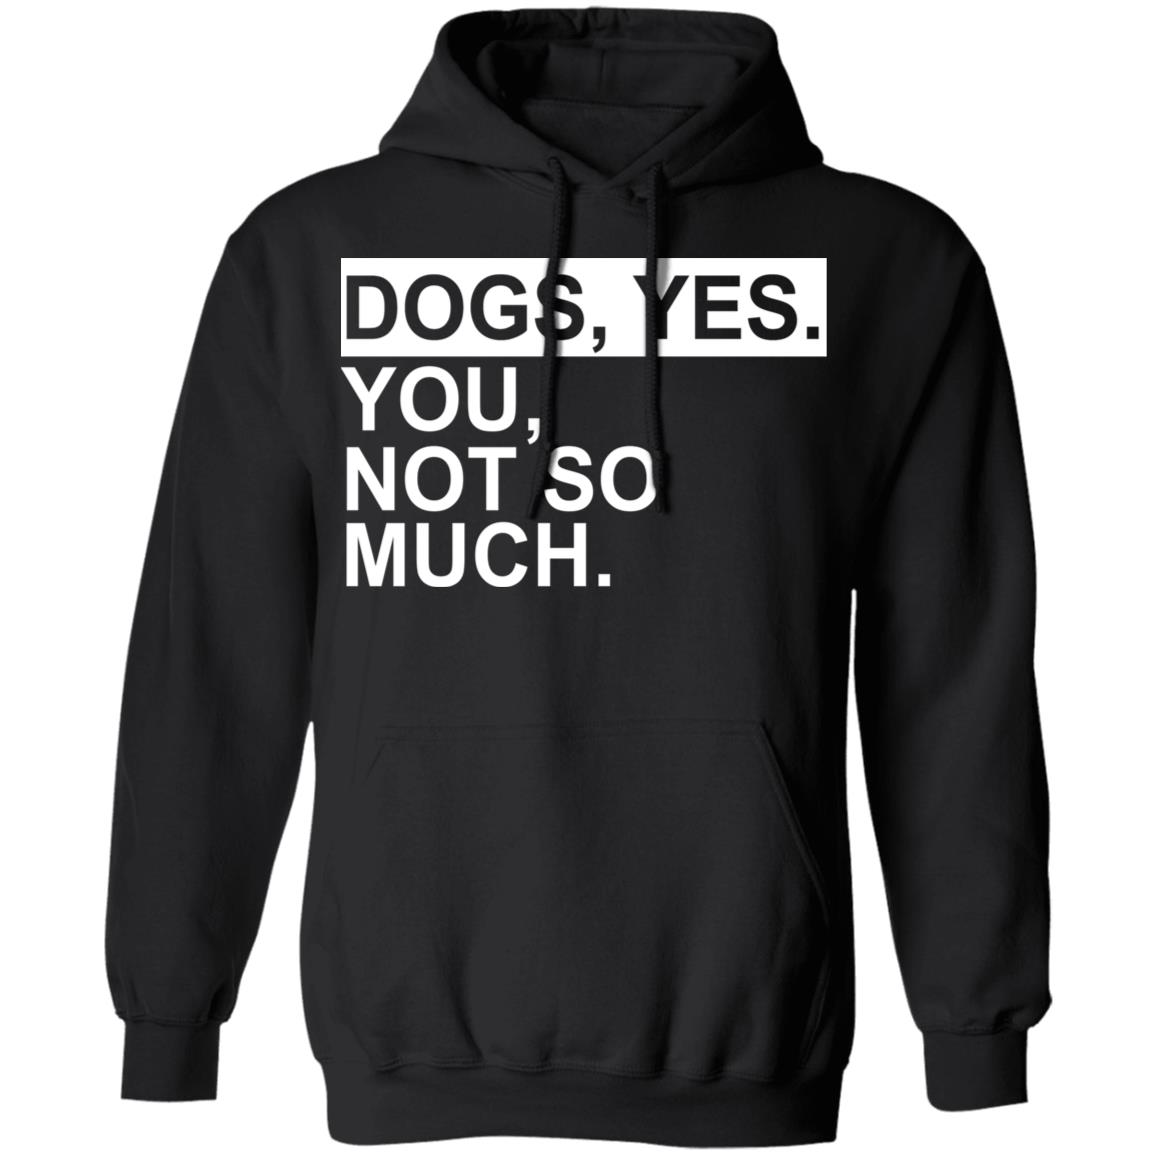 Dogs yes you not so much shirt, sweatshirt, hoodie